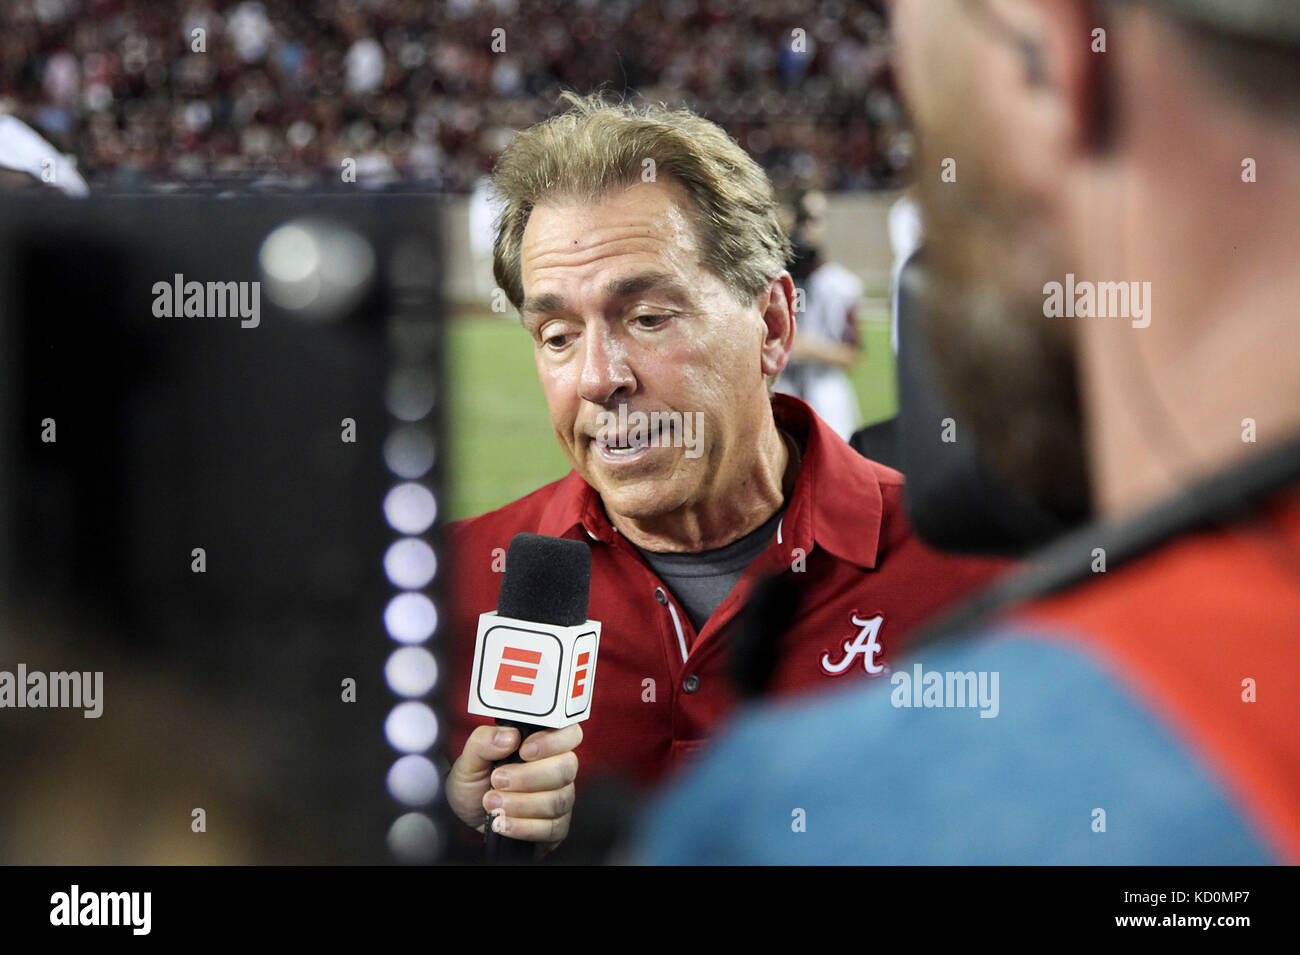 October 6, 2017: Alabama Crimson Tide head coach Nick Saban during the NCAA football game between the Alabama Crimson Tide and the Texas A&M Aggies at Kyle Field in College Station, TX; John Glaser/CSM. Stock Photo